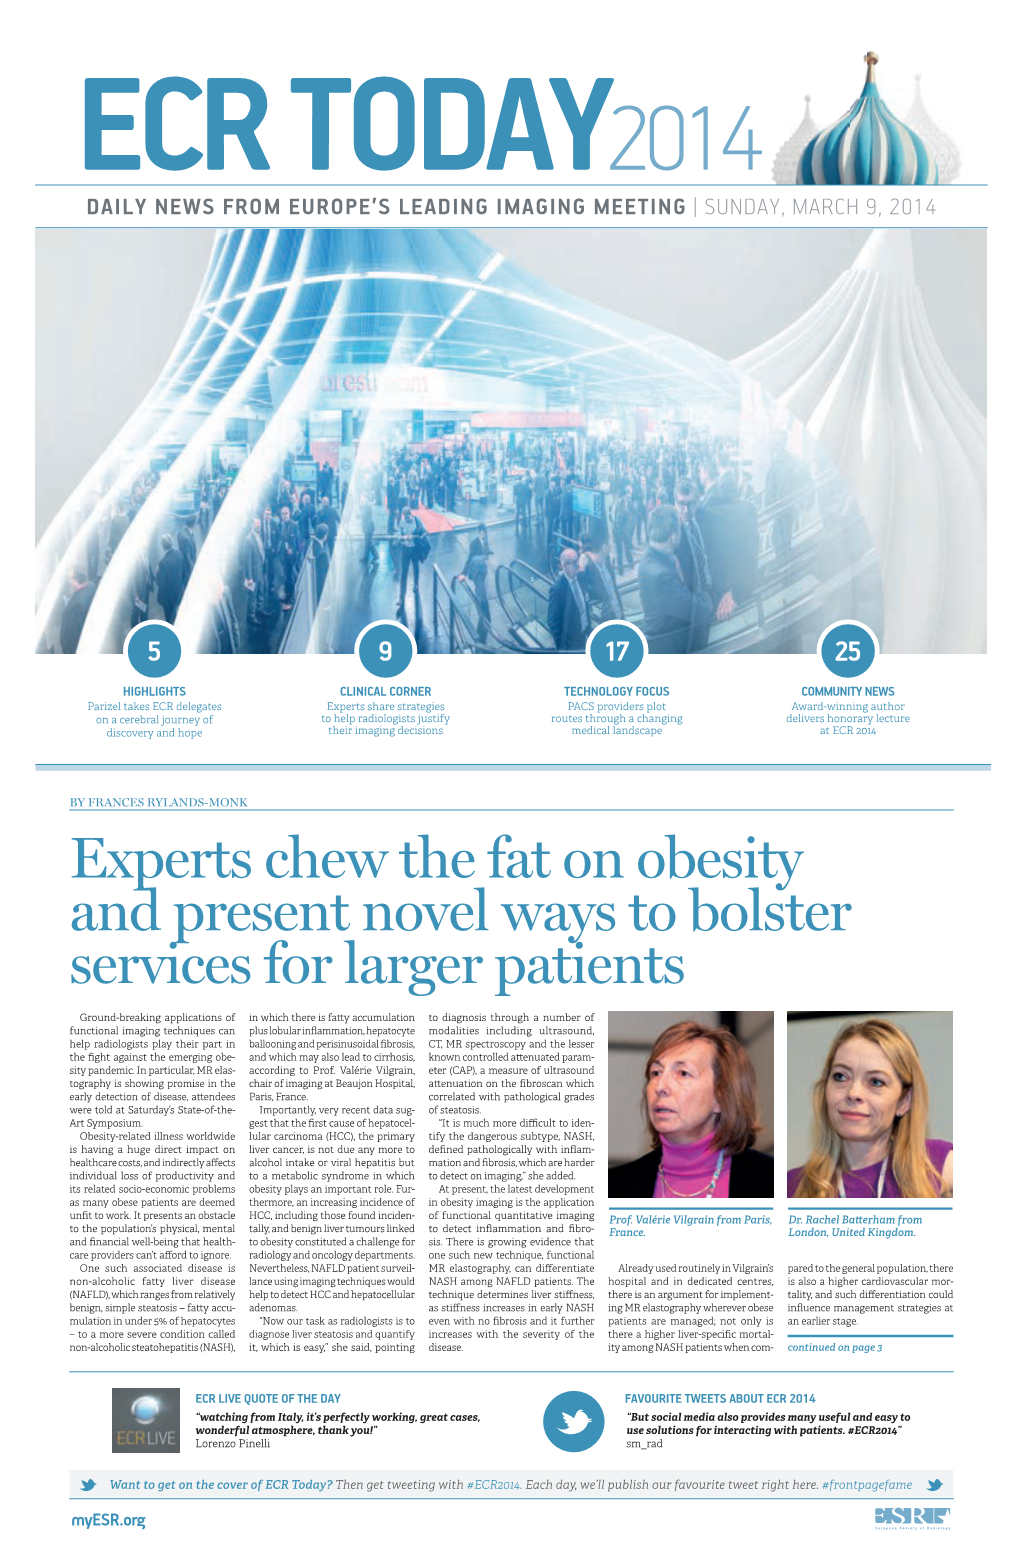 Experts Chew the Fat on Obesity and Present Novel Ways to Bolster Services for Larger Patients